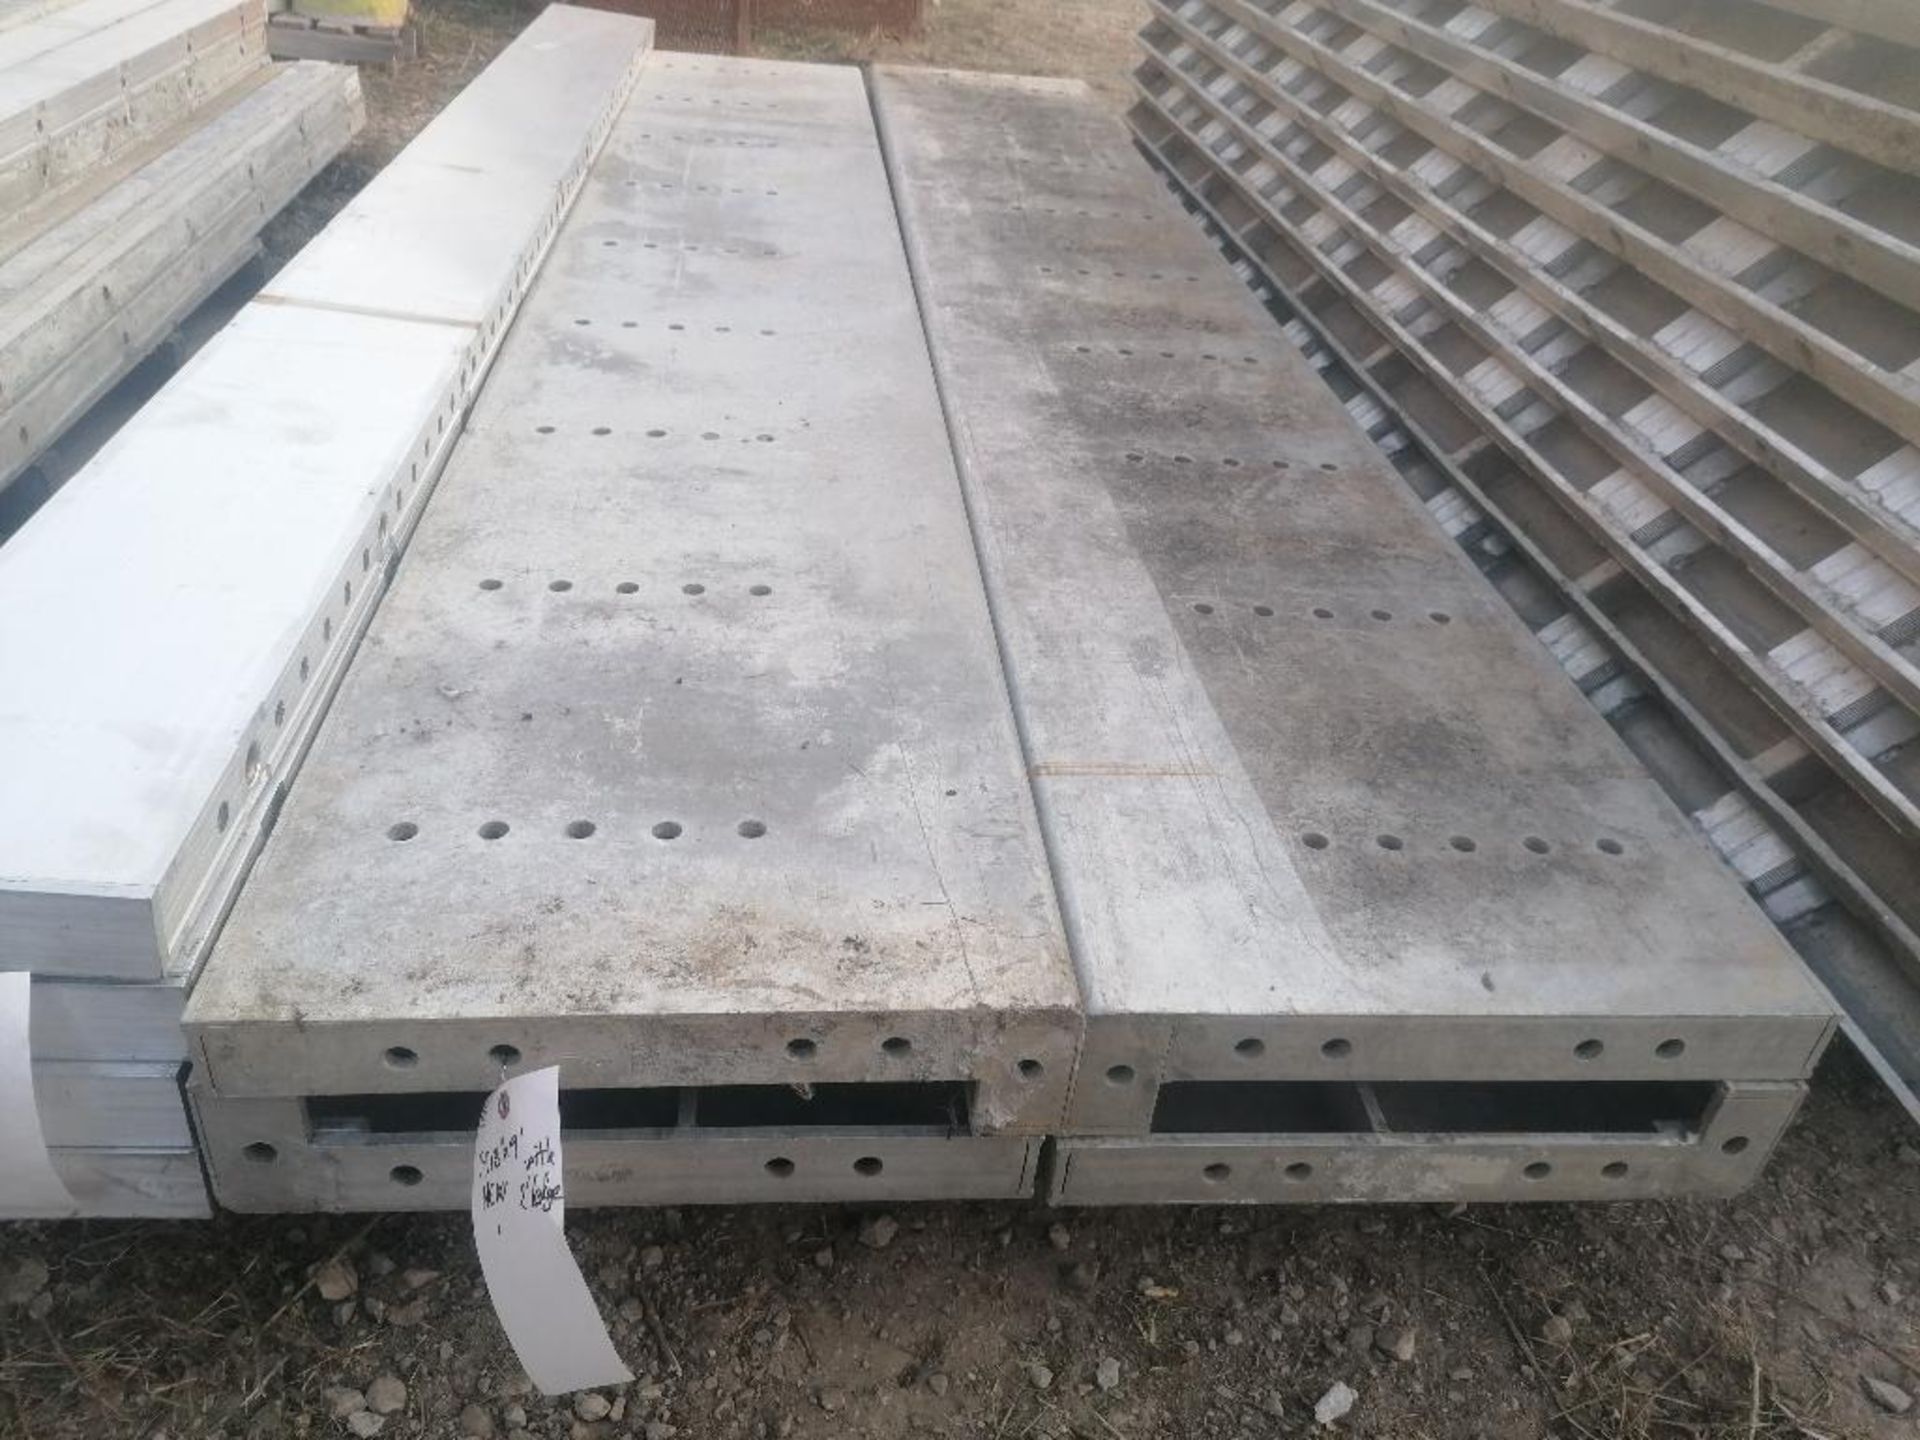 (4) NEW 18" x 9' with 2" Ledge Smooth Aluminum Concrete Forms 6-12 Hole Pattern. Located in